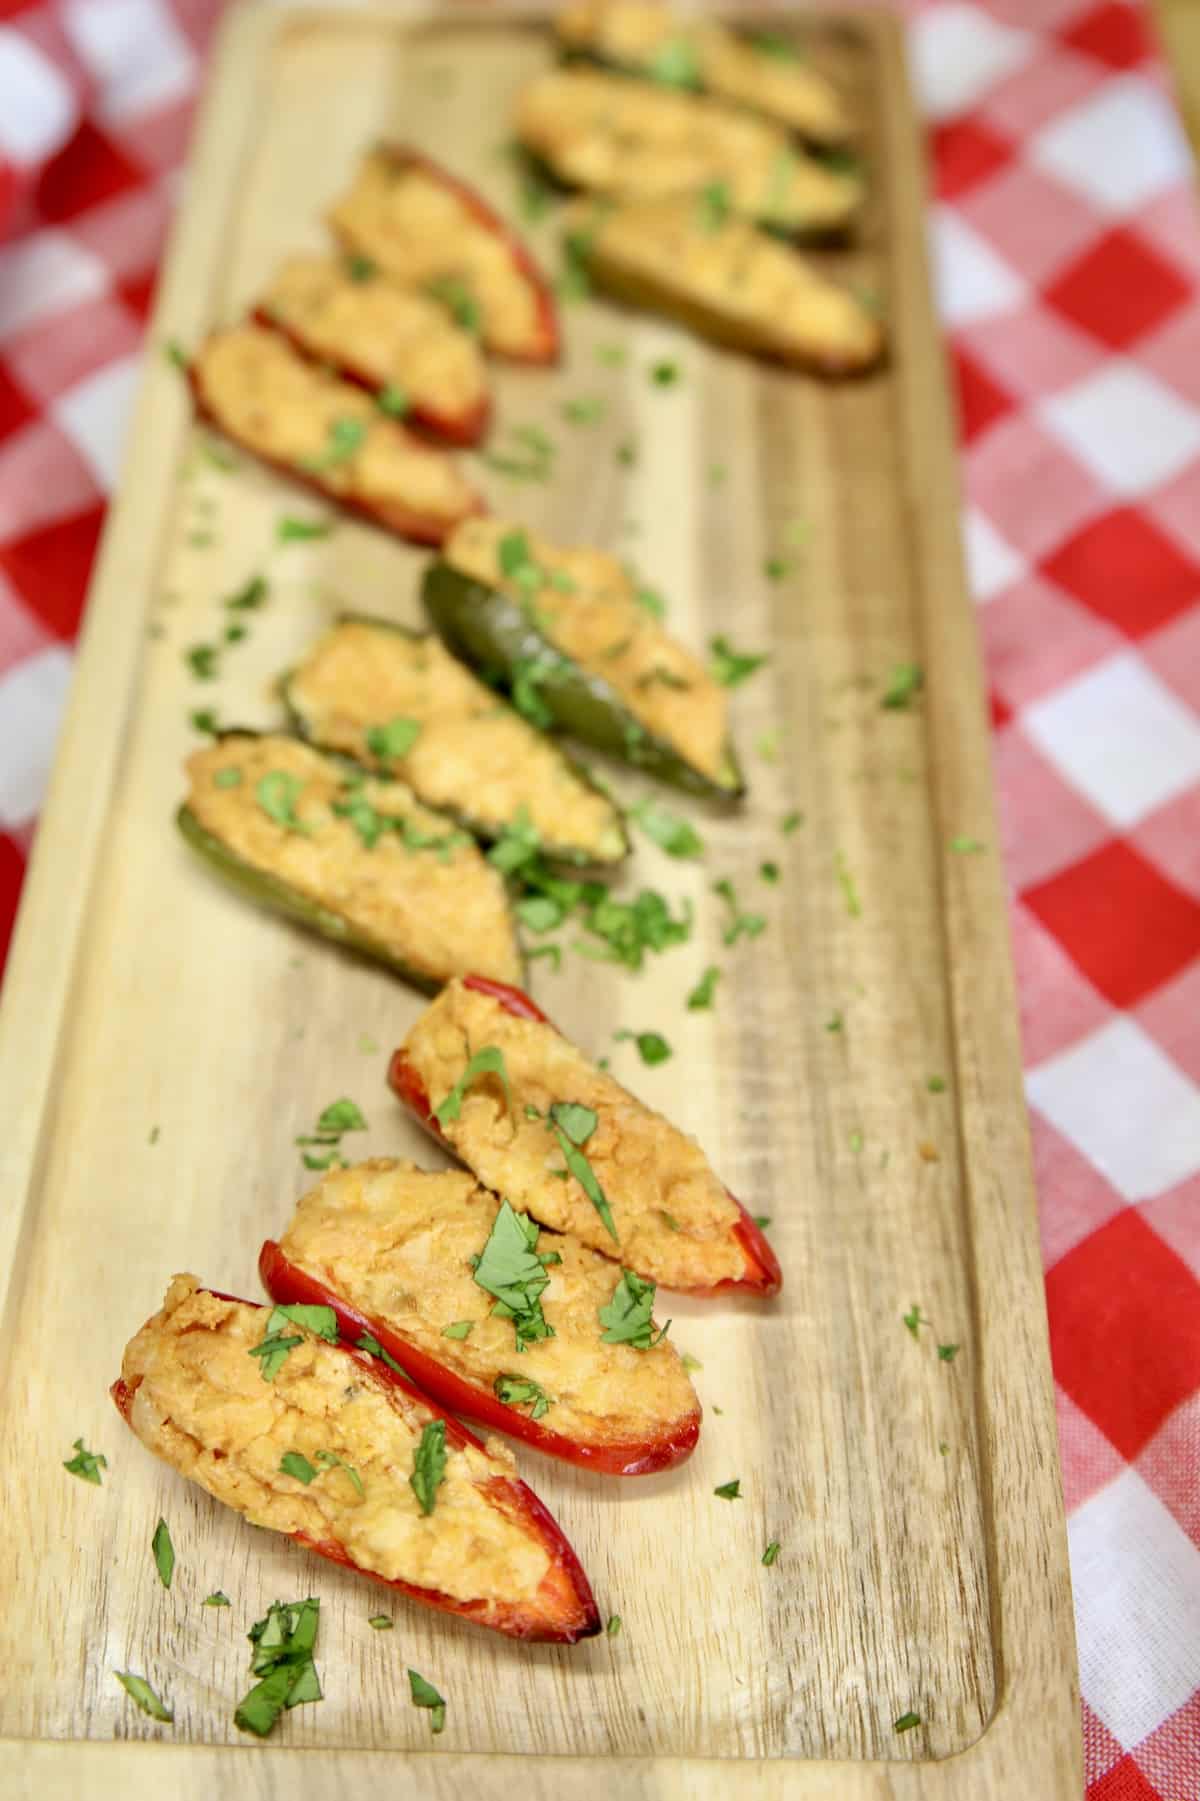 Jalapeno poppers with cheese filling on a serving board.